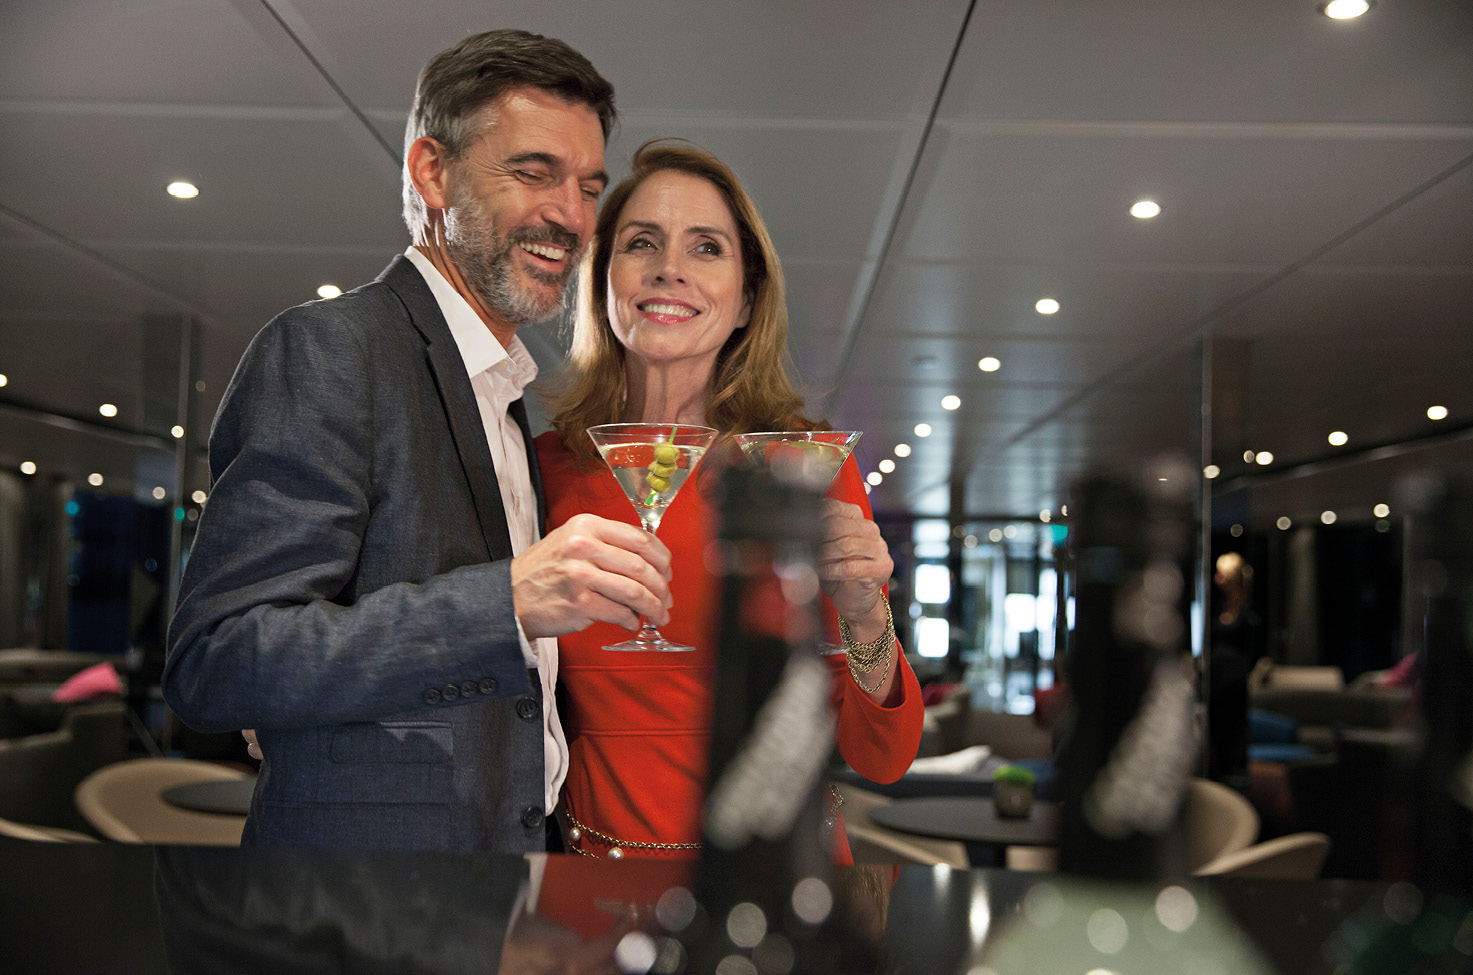 Smartly dressed man and woman smiling and enjoying cocktails in a bar lounge